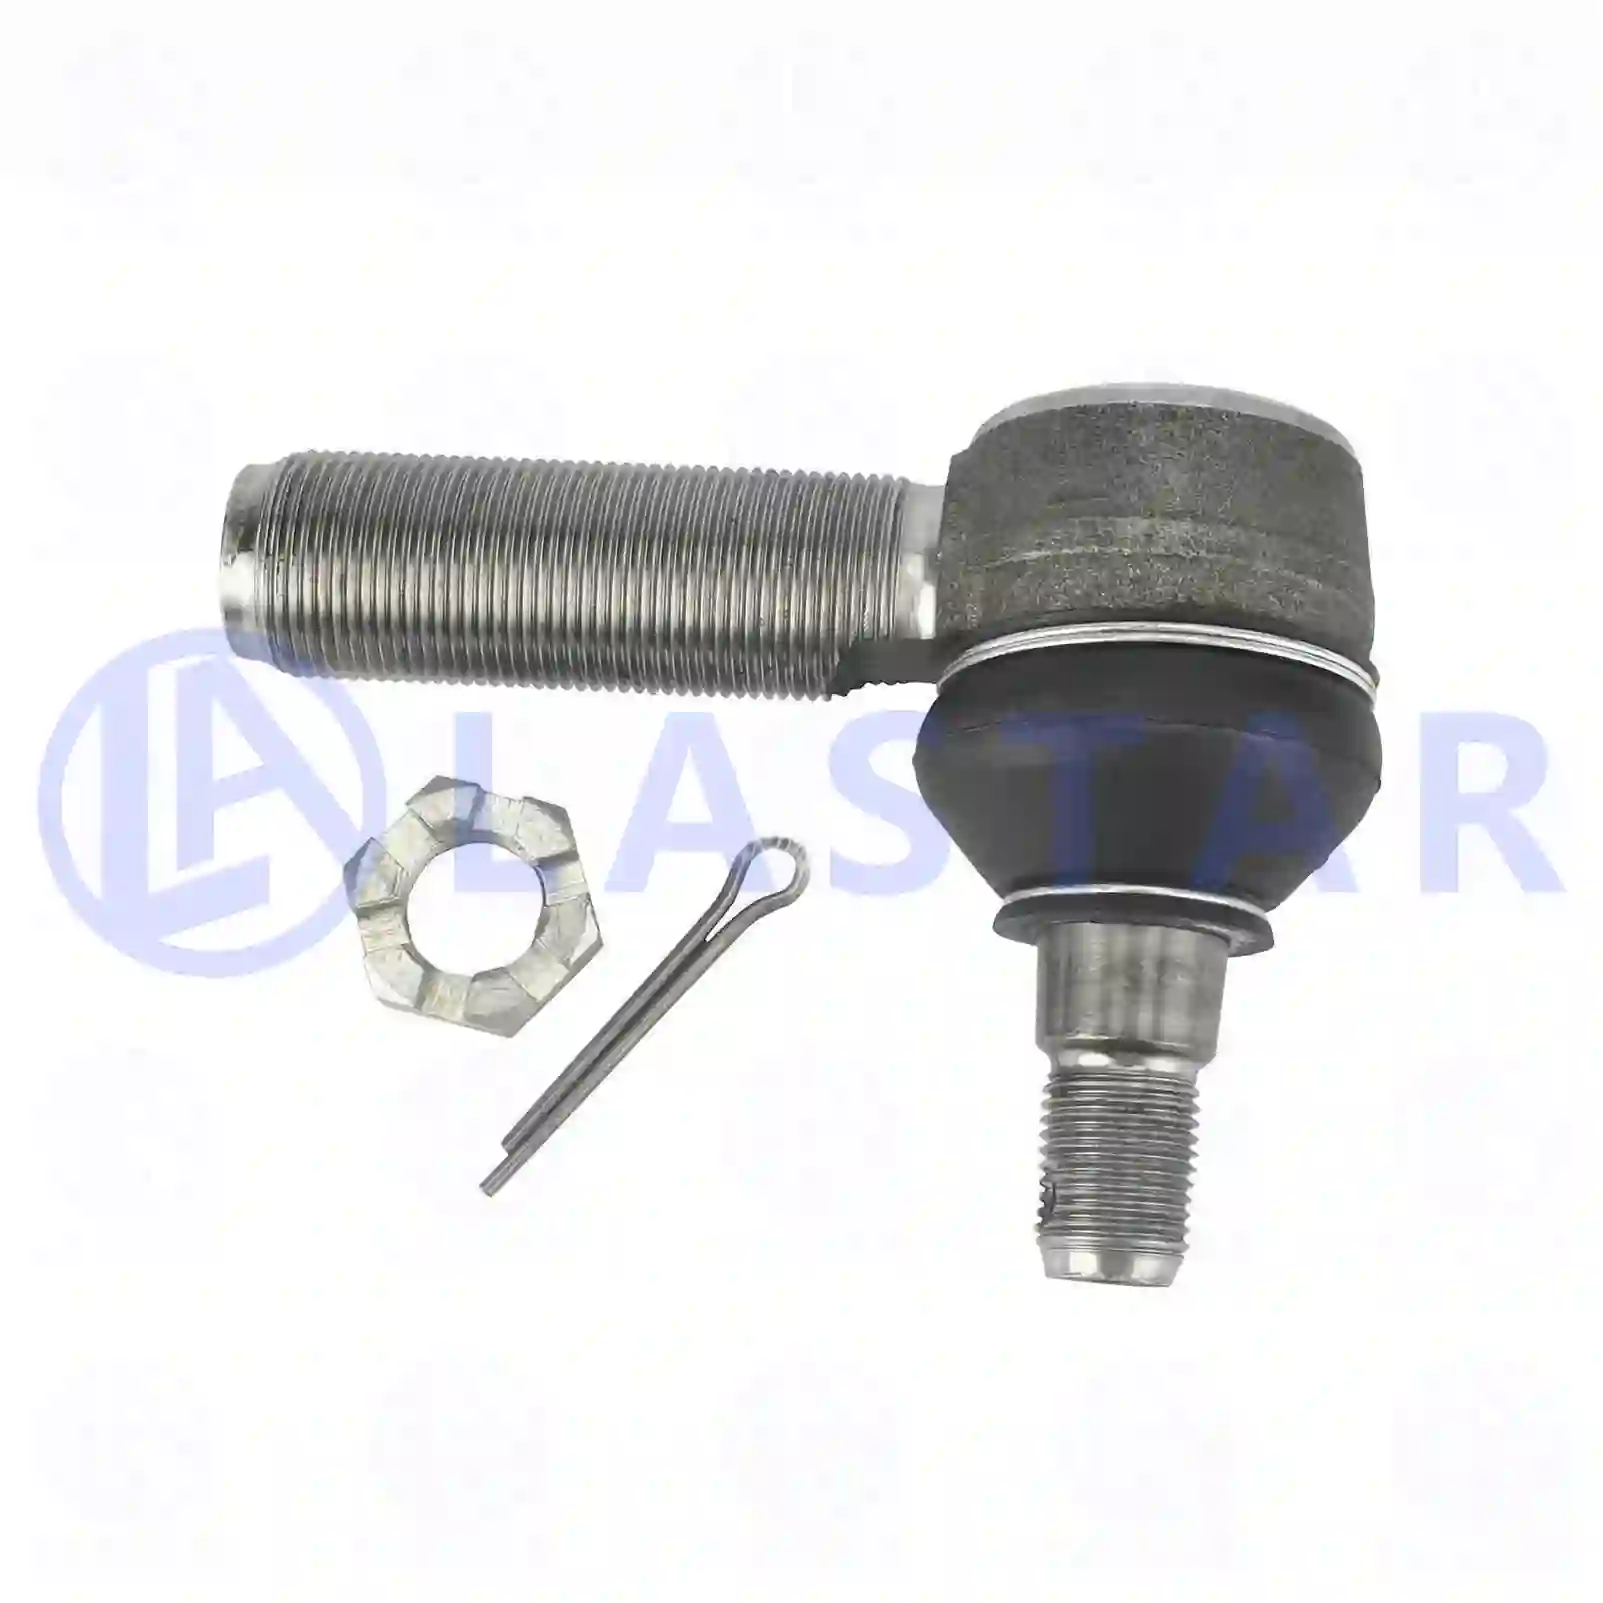 Ball joint, left hand thread, 77705256, 08193649, 08193649, 42480023, 8193649, 81853010076, 81953010076, 81953010078, 81953016141, 81953016304, 81953016322, 81956850388, 85400003301, 0003300235, 0003300735, 0003306835, 0003308635, 0003308835, 0004607348, 0024601948, 5000807553, 5000814096, 5001844135, 5001847436, 5001858756, 5001860124, 5001860769, 1517448, 1517488, ZG40354-0008 ||  77705256 Lastar Spare Part | Truck Spare Parts, Auotomotive Spare Parts Ball joint, left hand thread, 77705256, 08193649, 08193649, 42480023, 8193649, 81853010076, 81953010076, 81953010078, 81953016141, 81953016304, 81953016322, 81956850388, 85400003301, 0003300235, 0003300735, 0003306835, 0003308635, 0003308835, 0004607348, 0024601948, 5000807553, 5000814096, 5001844135, 5001847436, 5001858756, 5001860124, 5001860769, 1517448, 1517488, ZG40354-0008 ||  77705256 Lastar Spare Part | Truck Spare Parts, Auotomotive Spare Parts